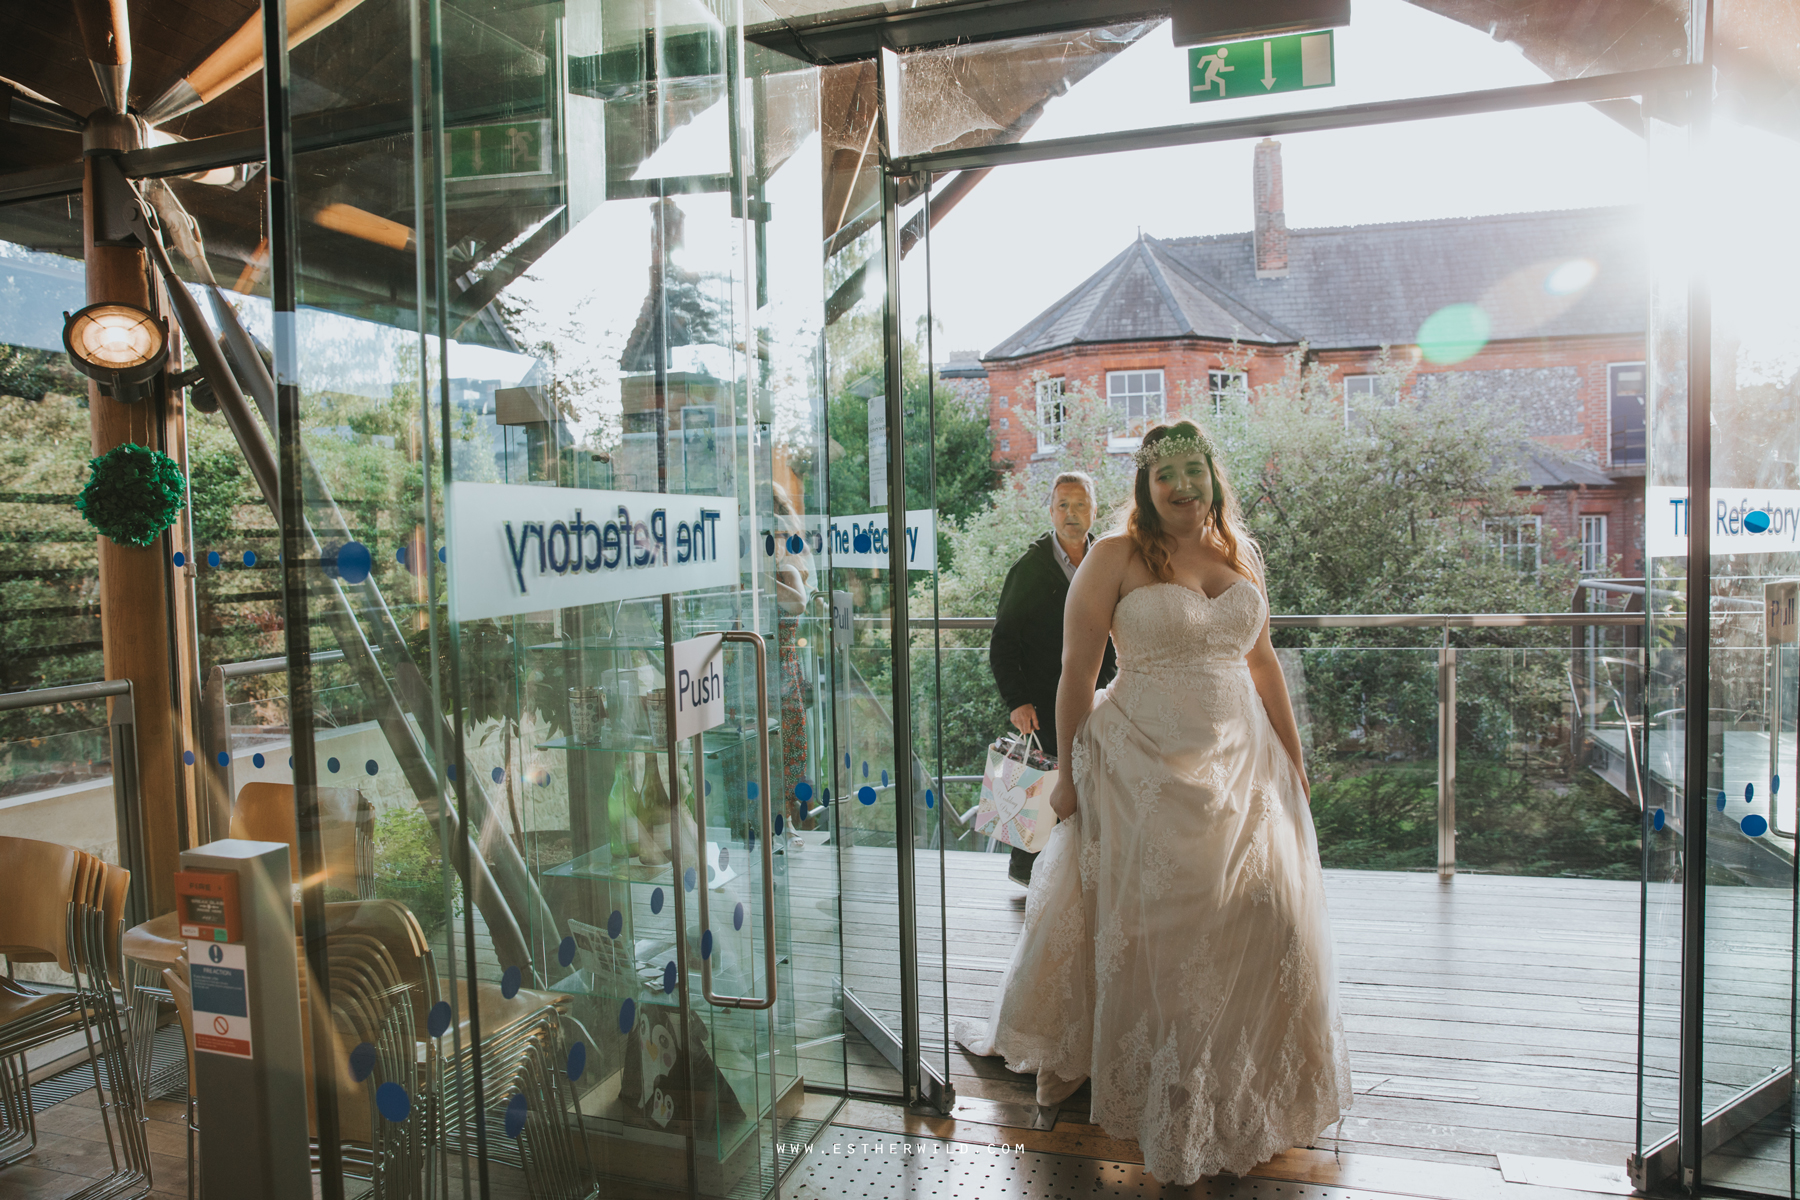 Norwich_Castle_Arcade_Grosvenor_Chip_Birdcage_Cathedral_Cloisters_Refectory_Wedding_Photography_Esther_Wild_Photographer_Norfolk_Kings_Lynn_3R8A2234.jpg